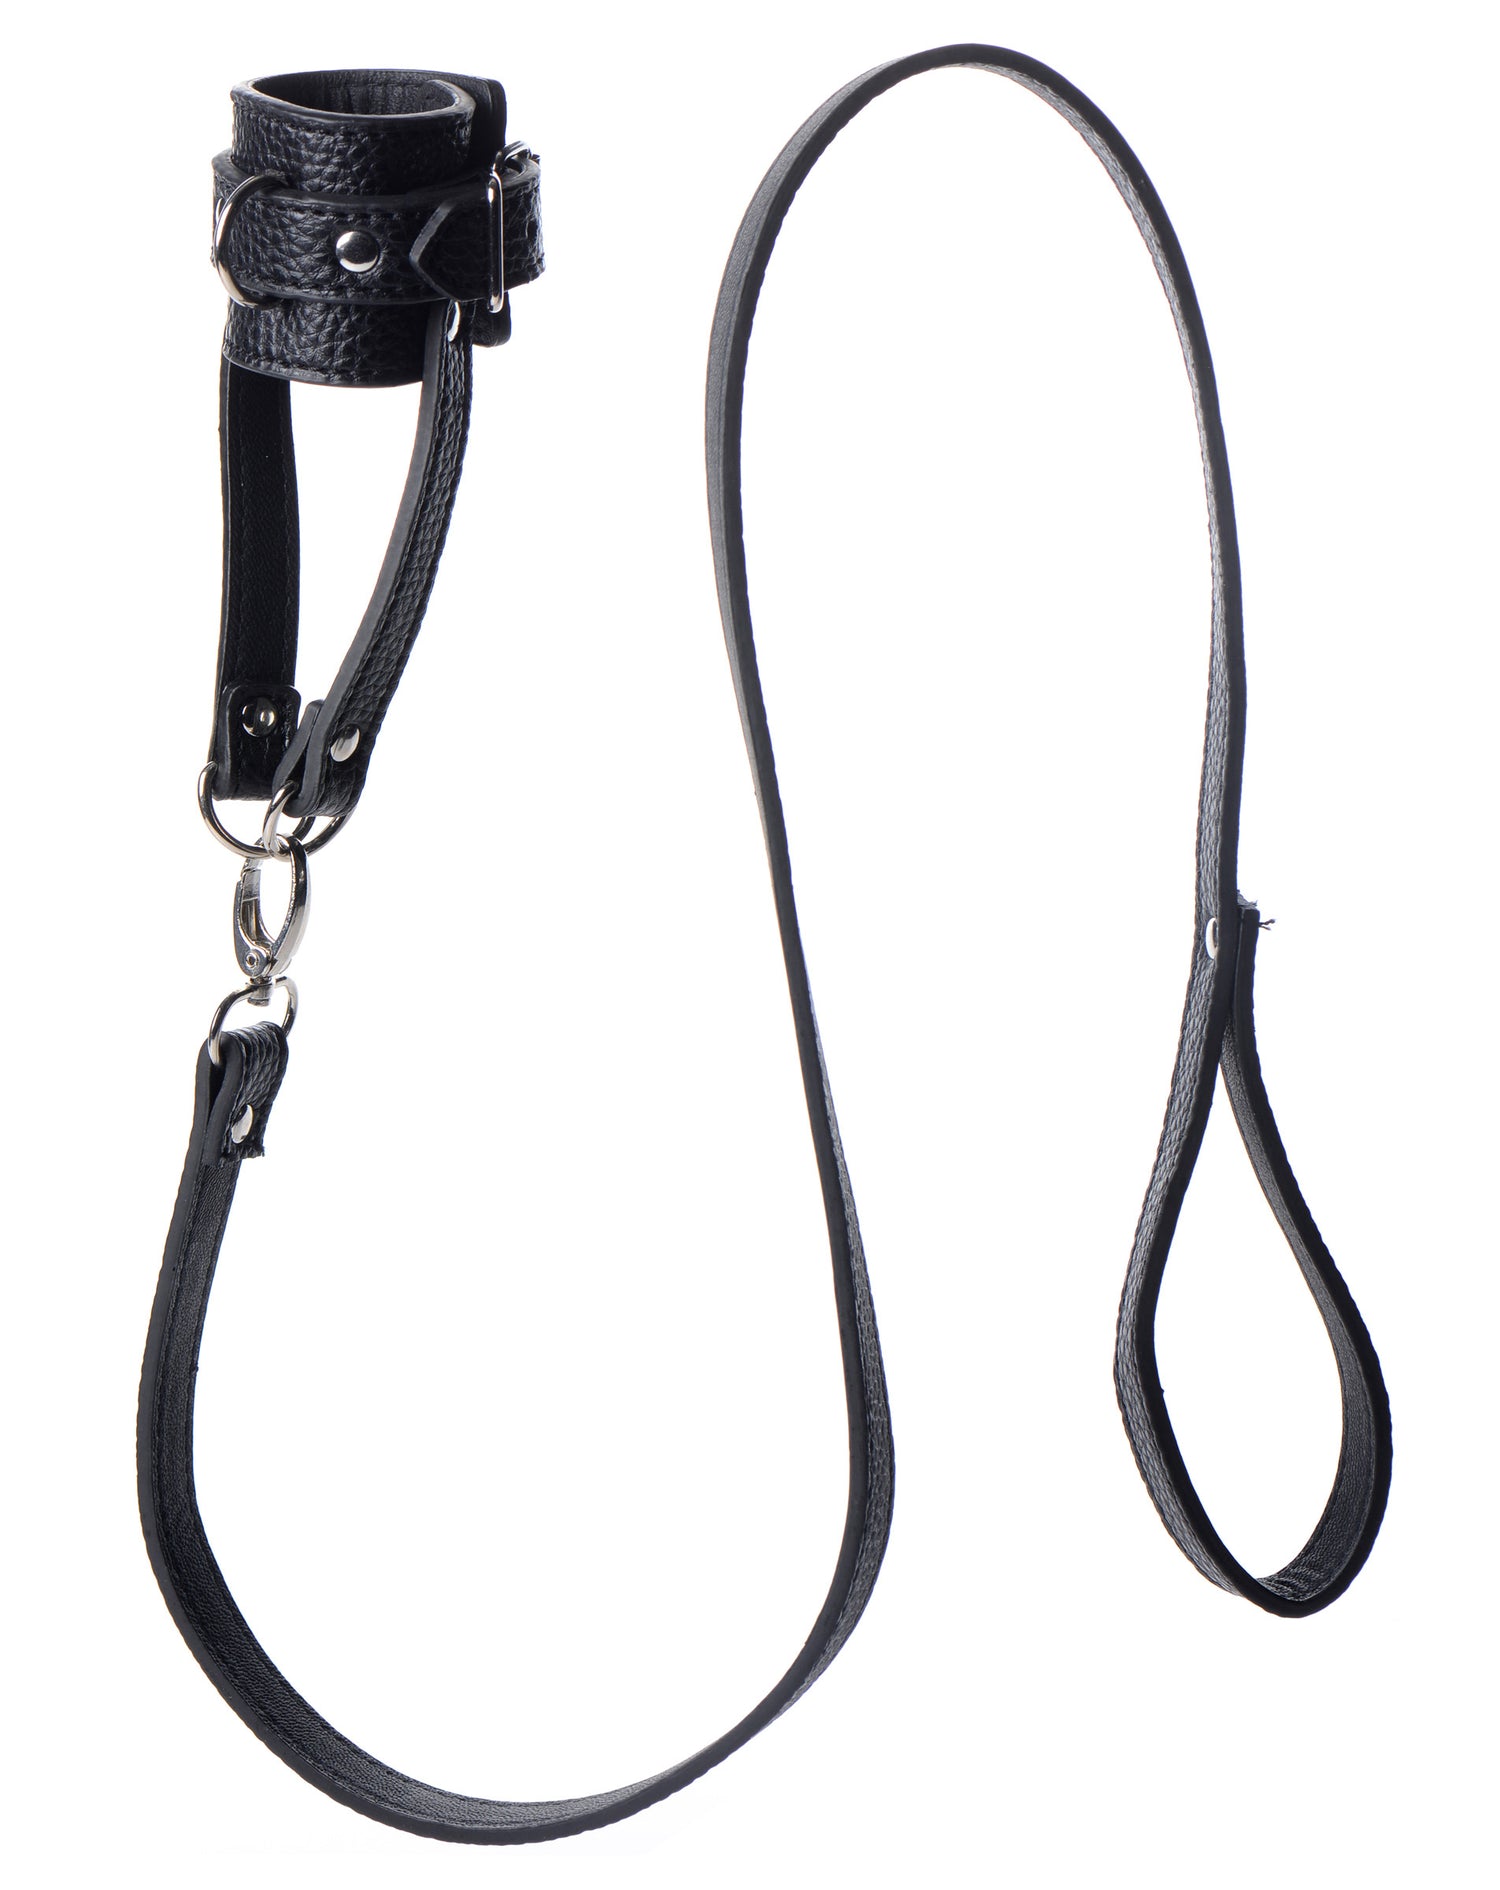 Strict Ball Stretcher With Leash - Just for you desires